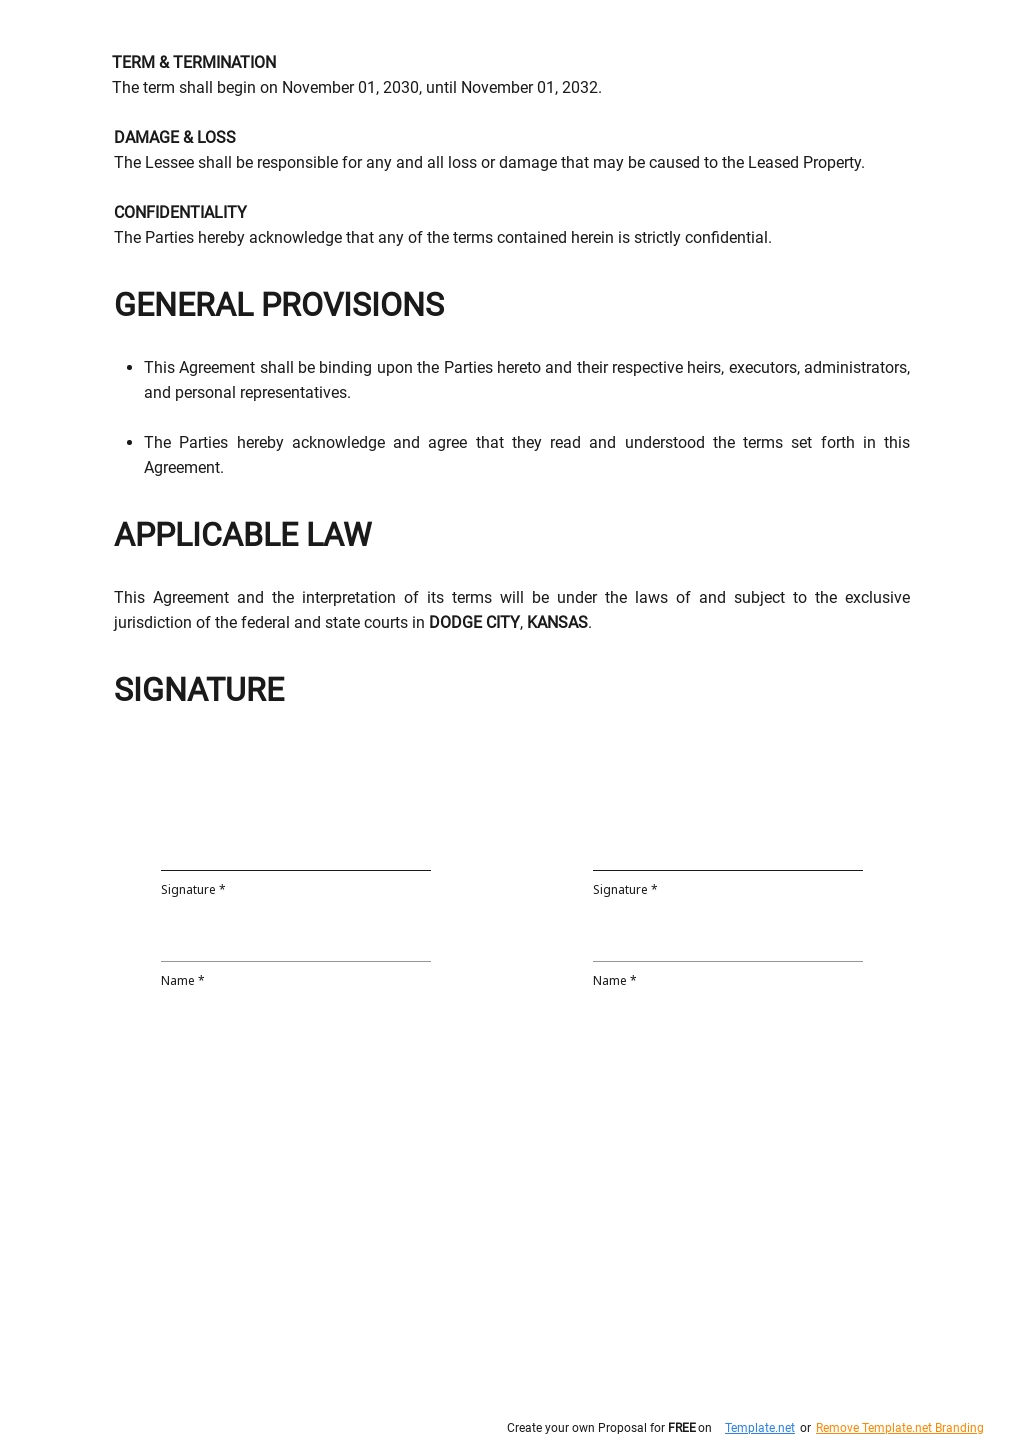 Standard Store Lease Agreement Template 2.jpe